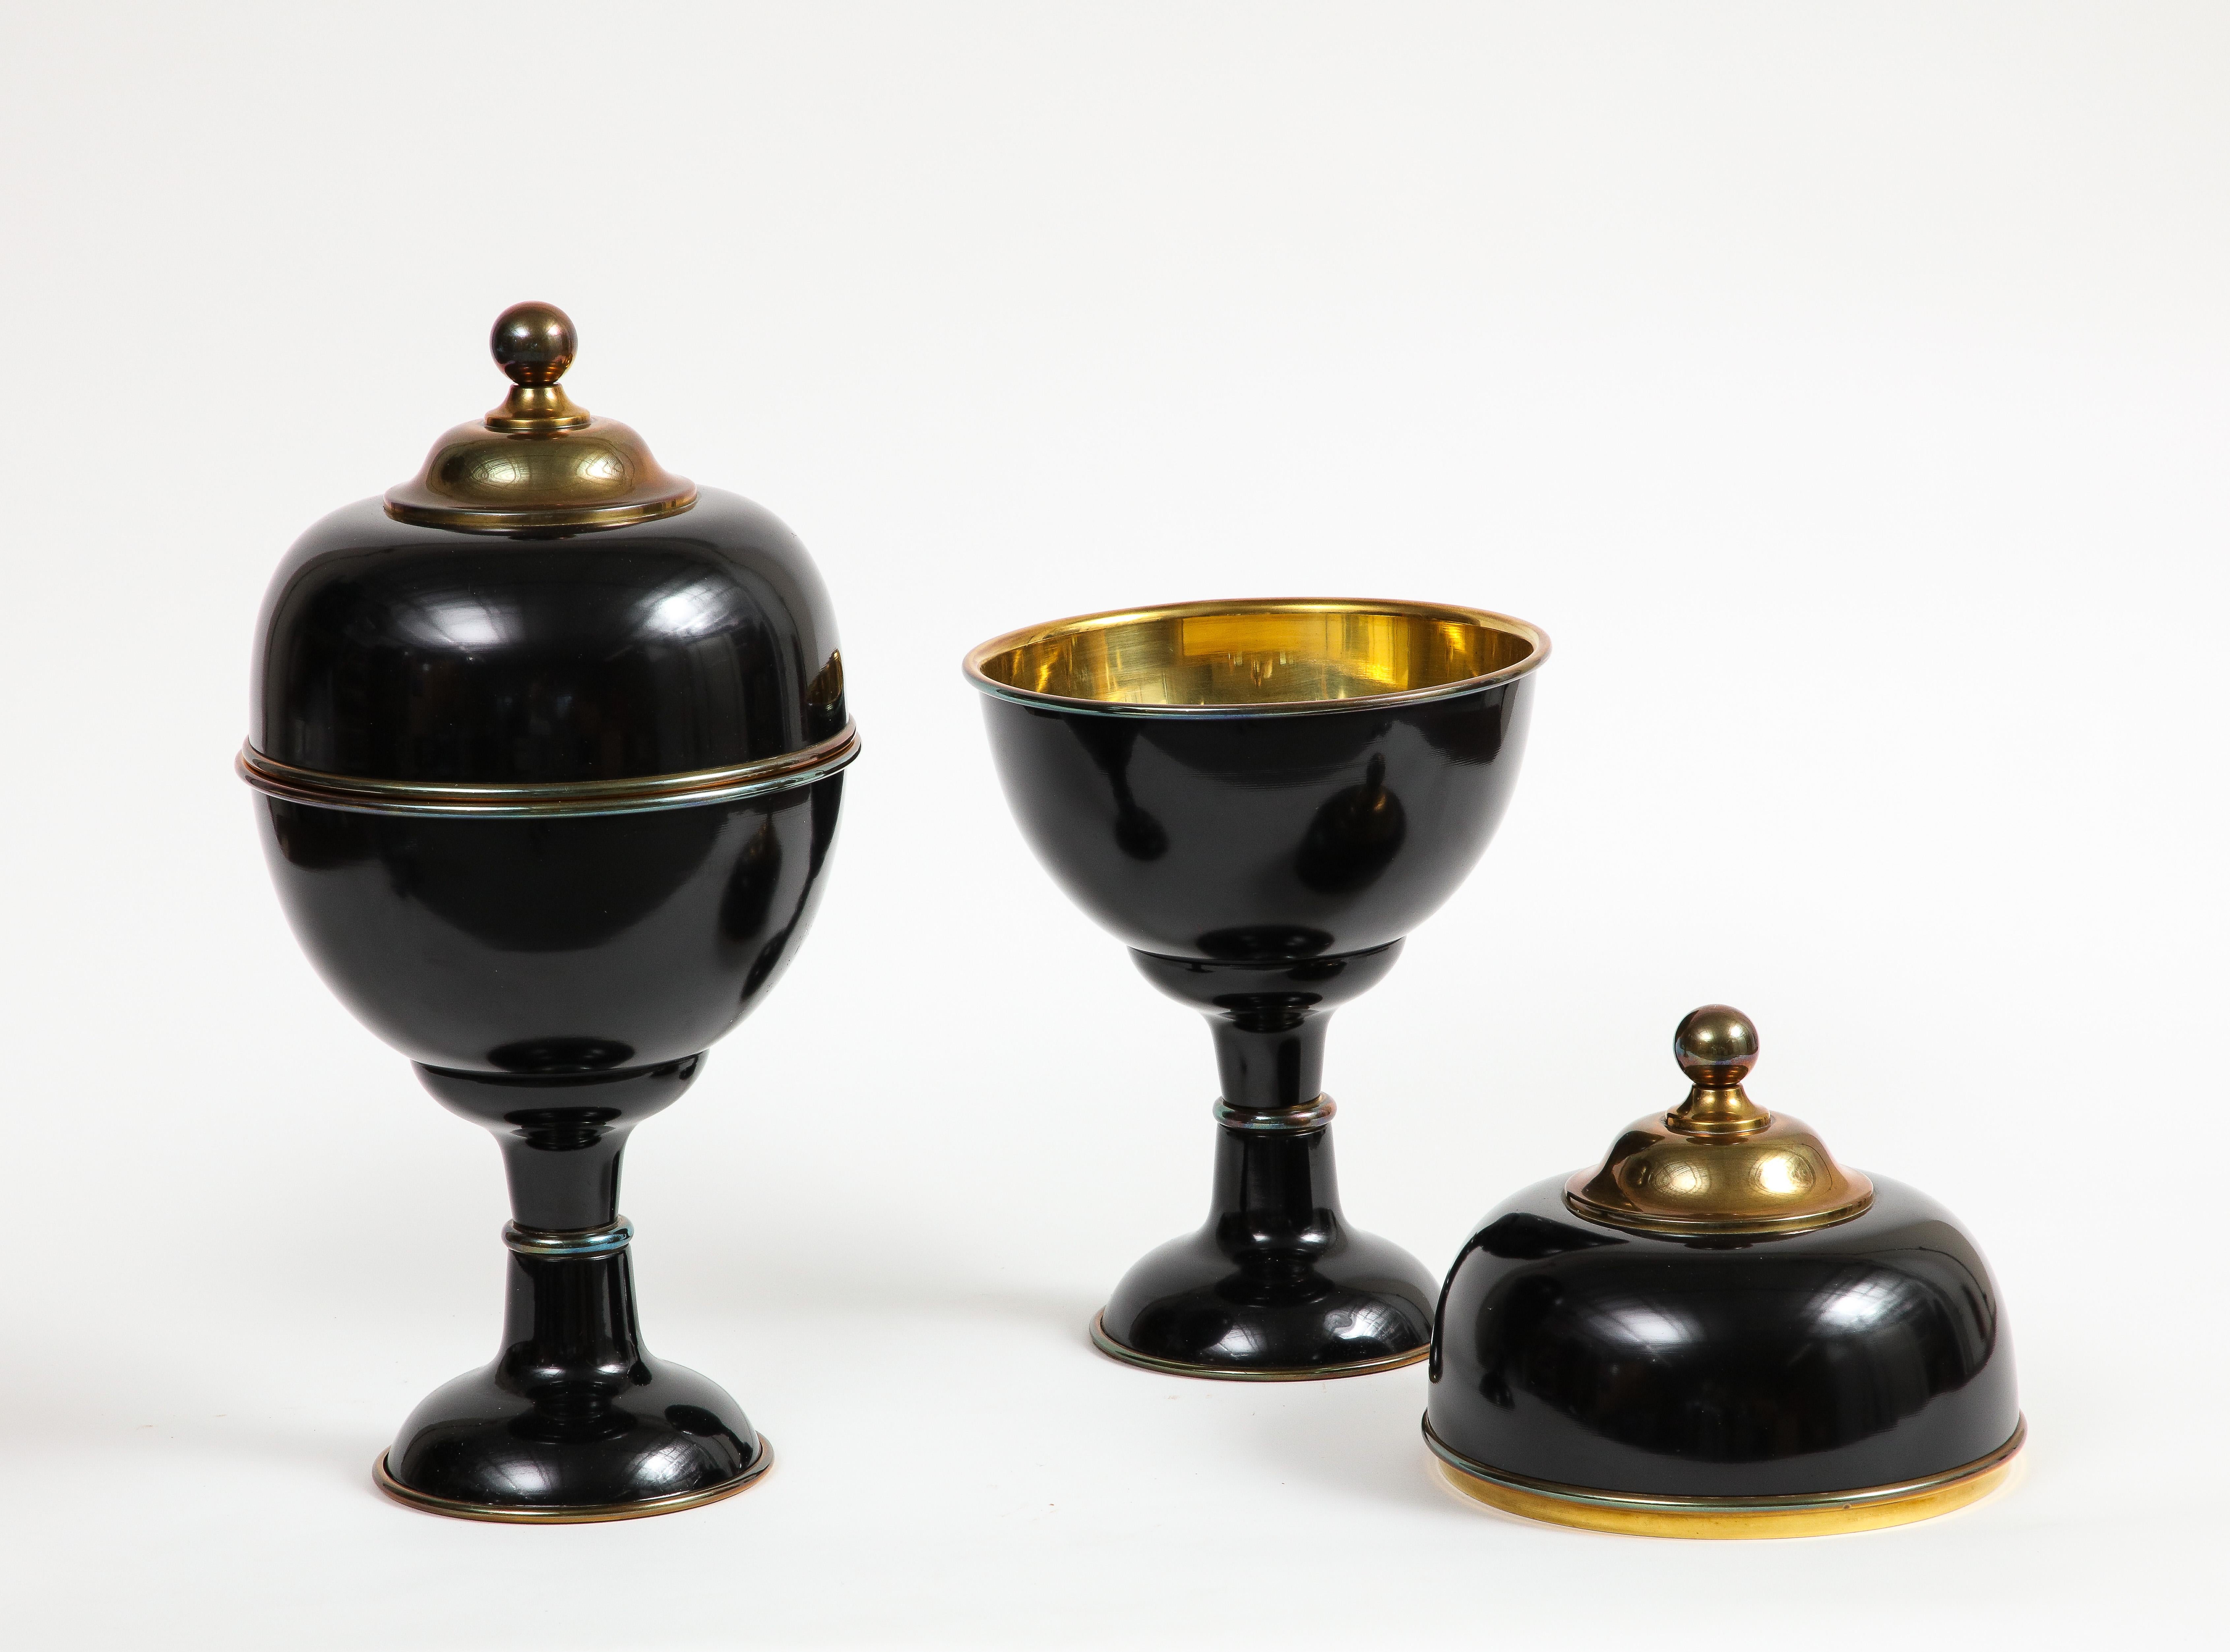 Pair of Large Decorative Black Enamel Urns with Brass Detail In Good Condition For Sale In Chicago, IL